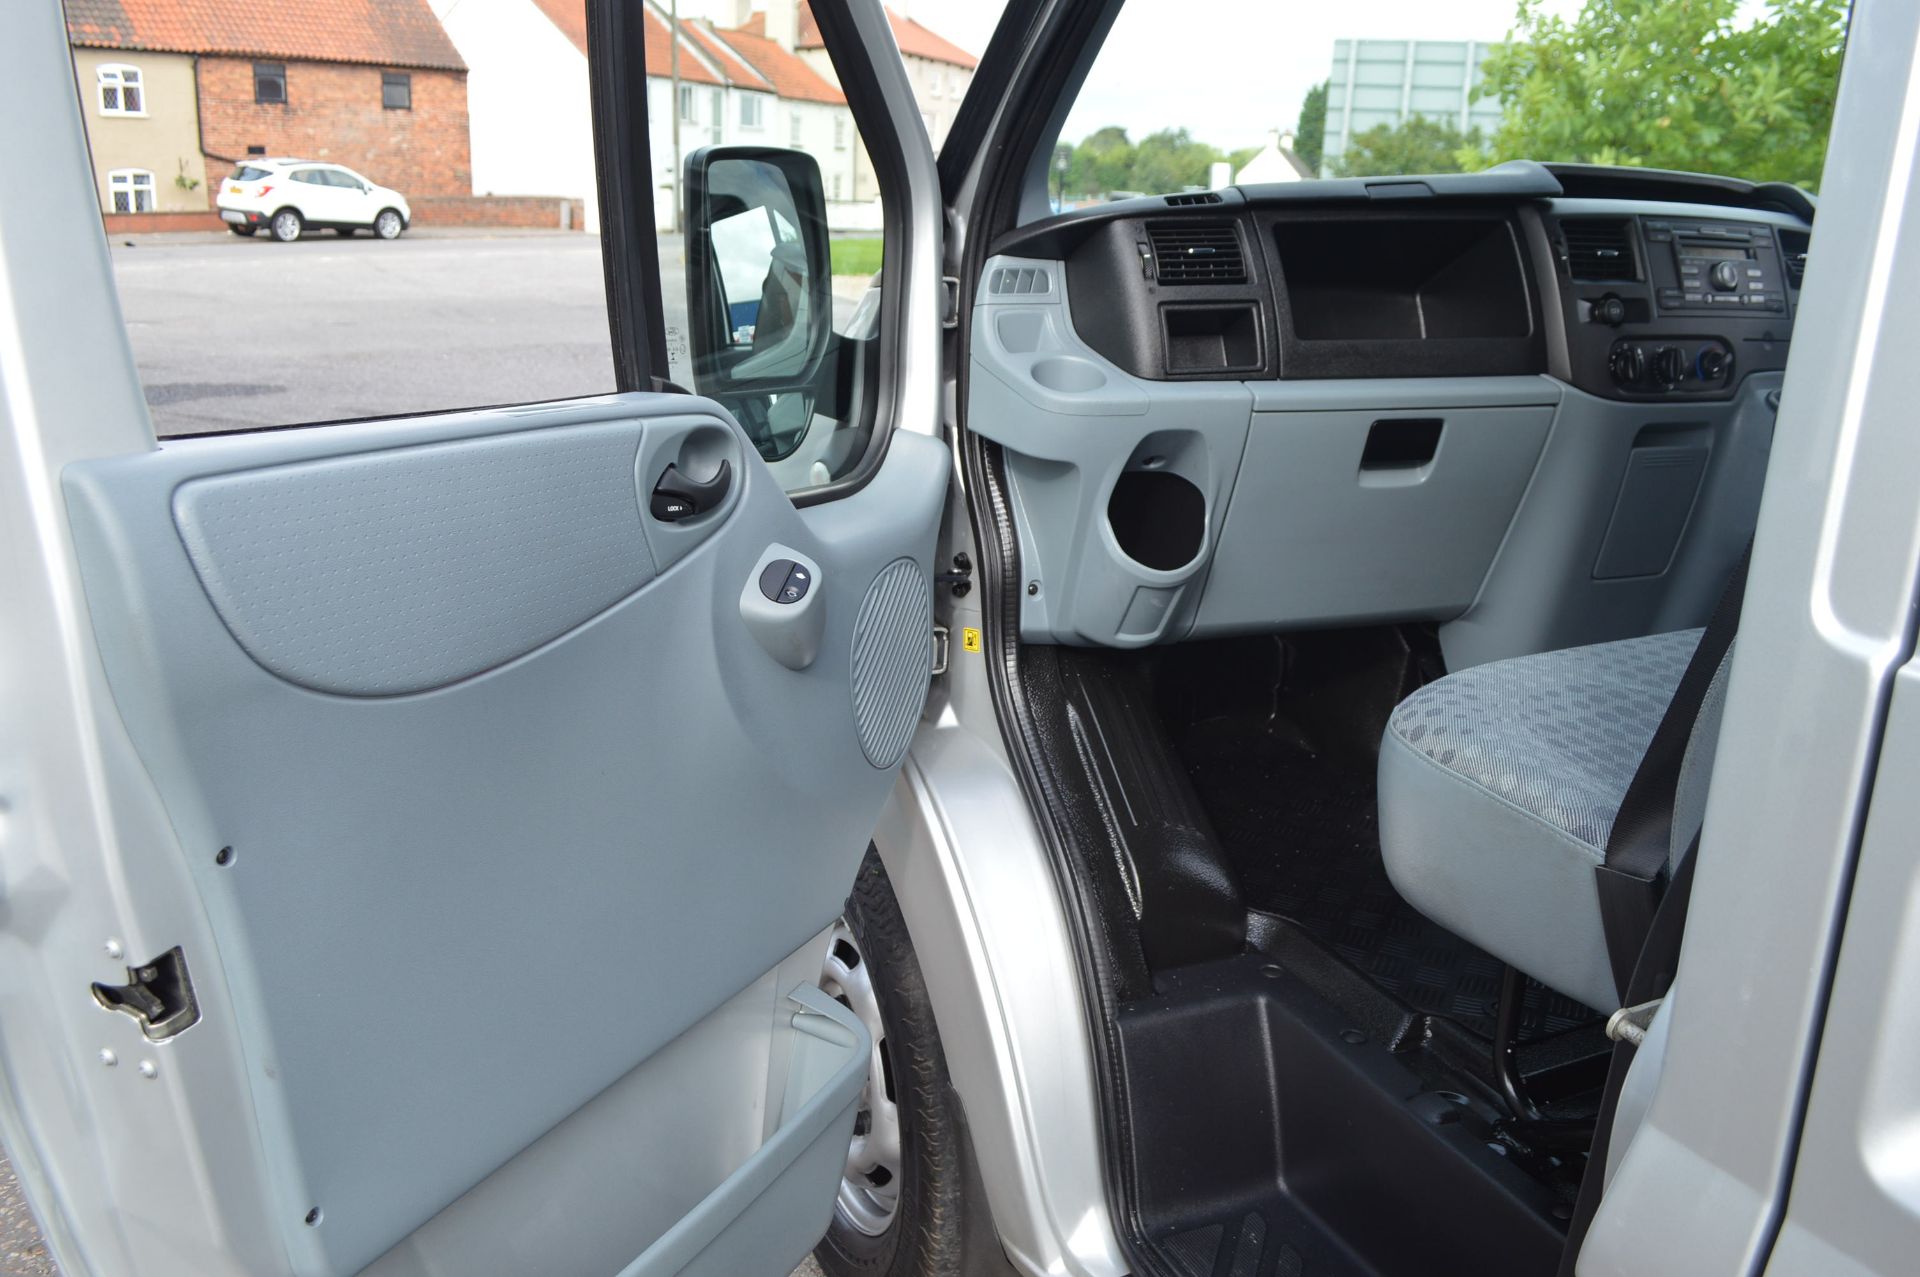 2013/63 REG FORD TRANSIT 125 T330 FWD - 1 OWNER FROM NEW, AIR CON, HEATED WINDSCREEN! *NO VAT* - Image 9 of 25